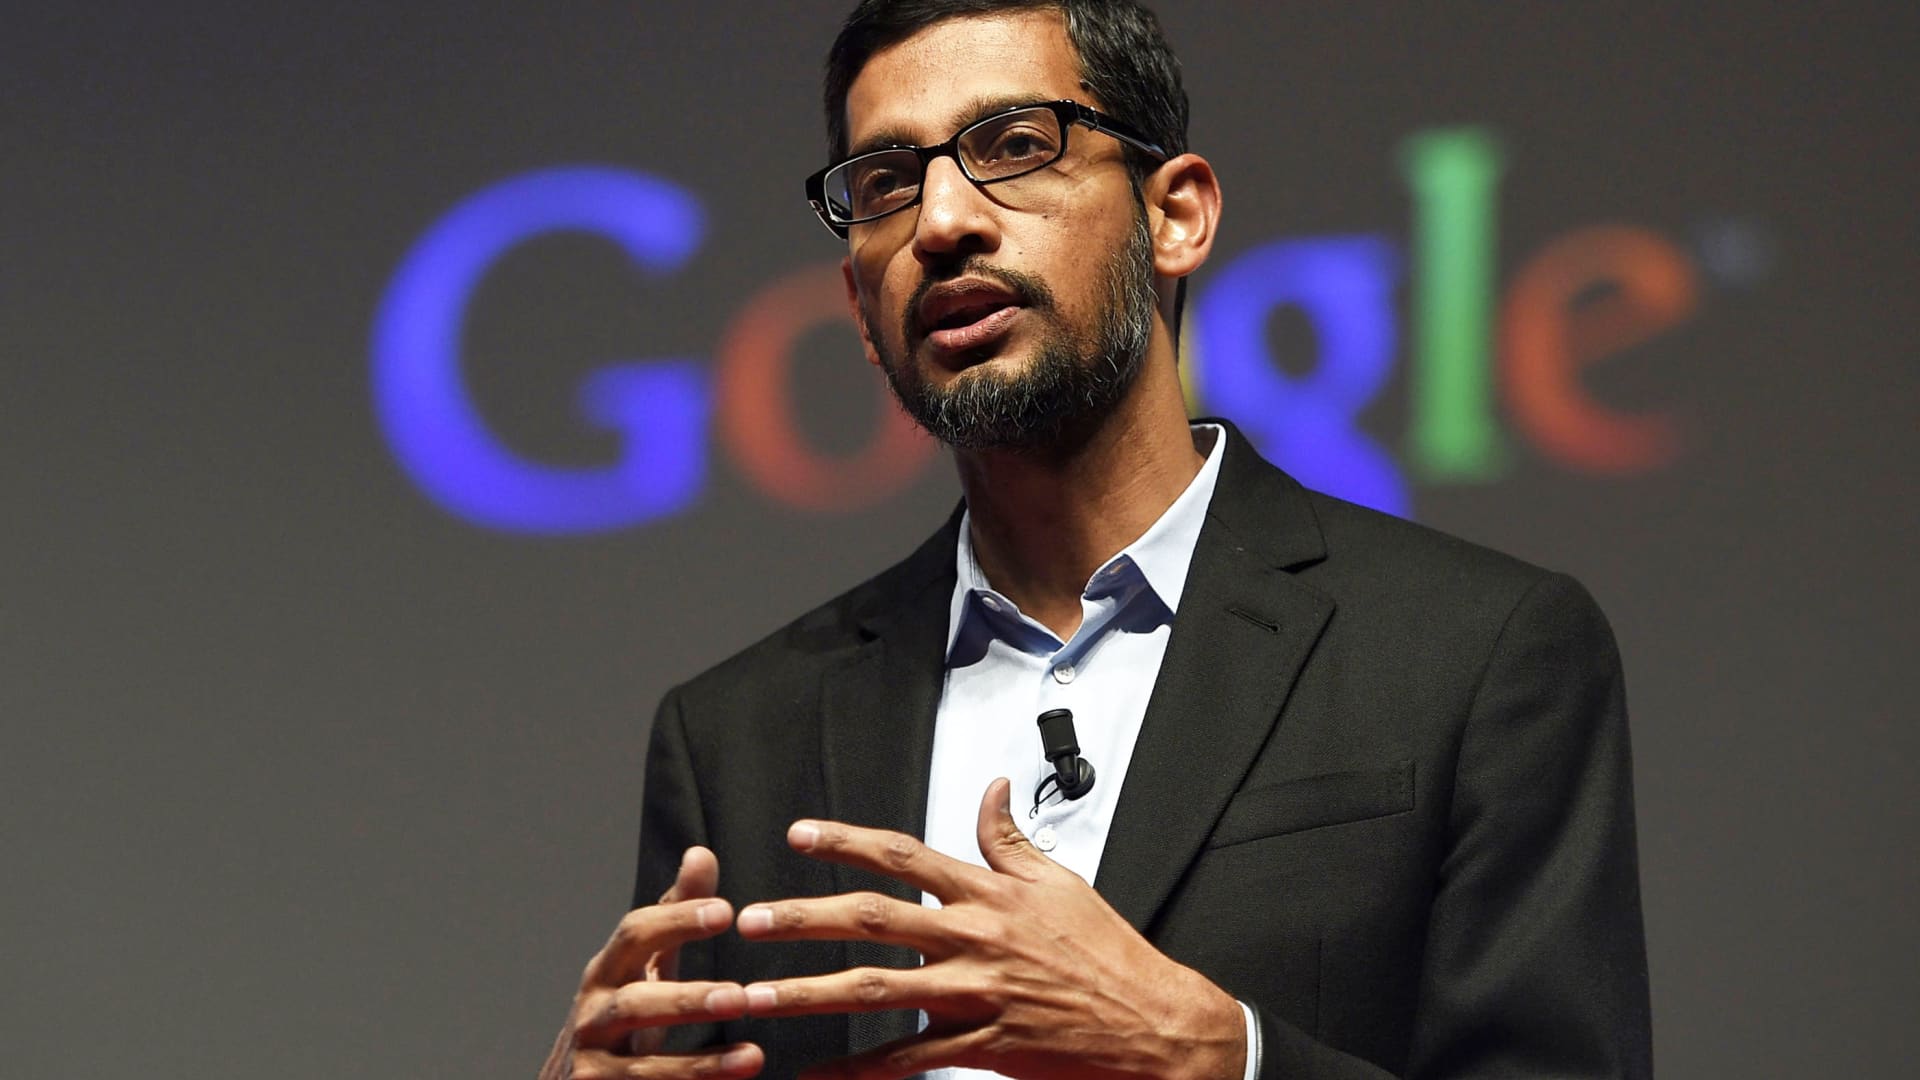 Google CEO defends job cuts in animated town hall as employees demand clarity on process – CNBC